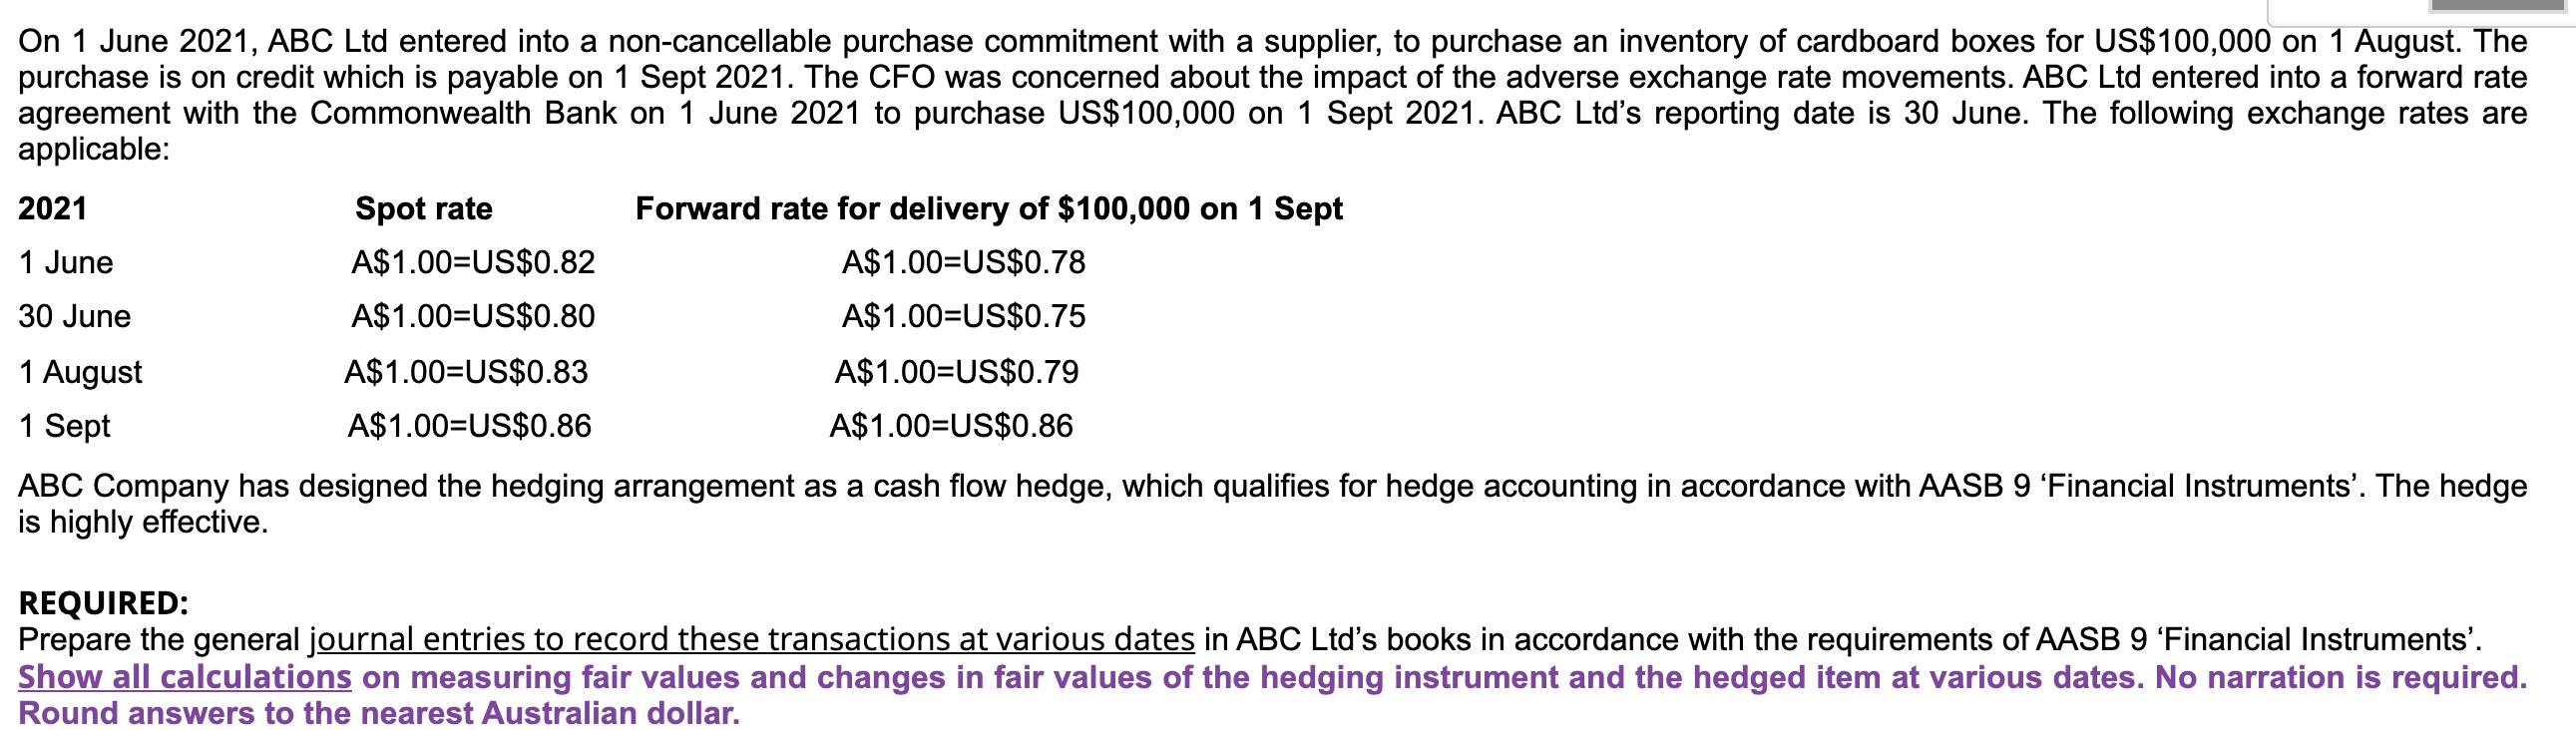 On 1 June 2021, ABC Ltd entered into a non-cancellable purchase commitment with a supplier, to purchase an inventory of cardb